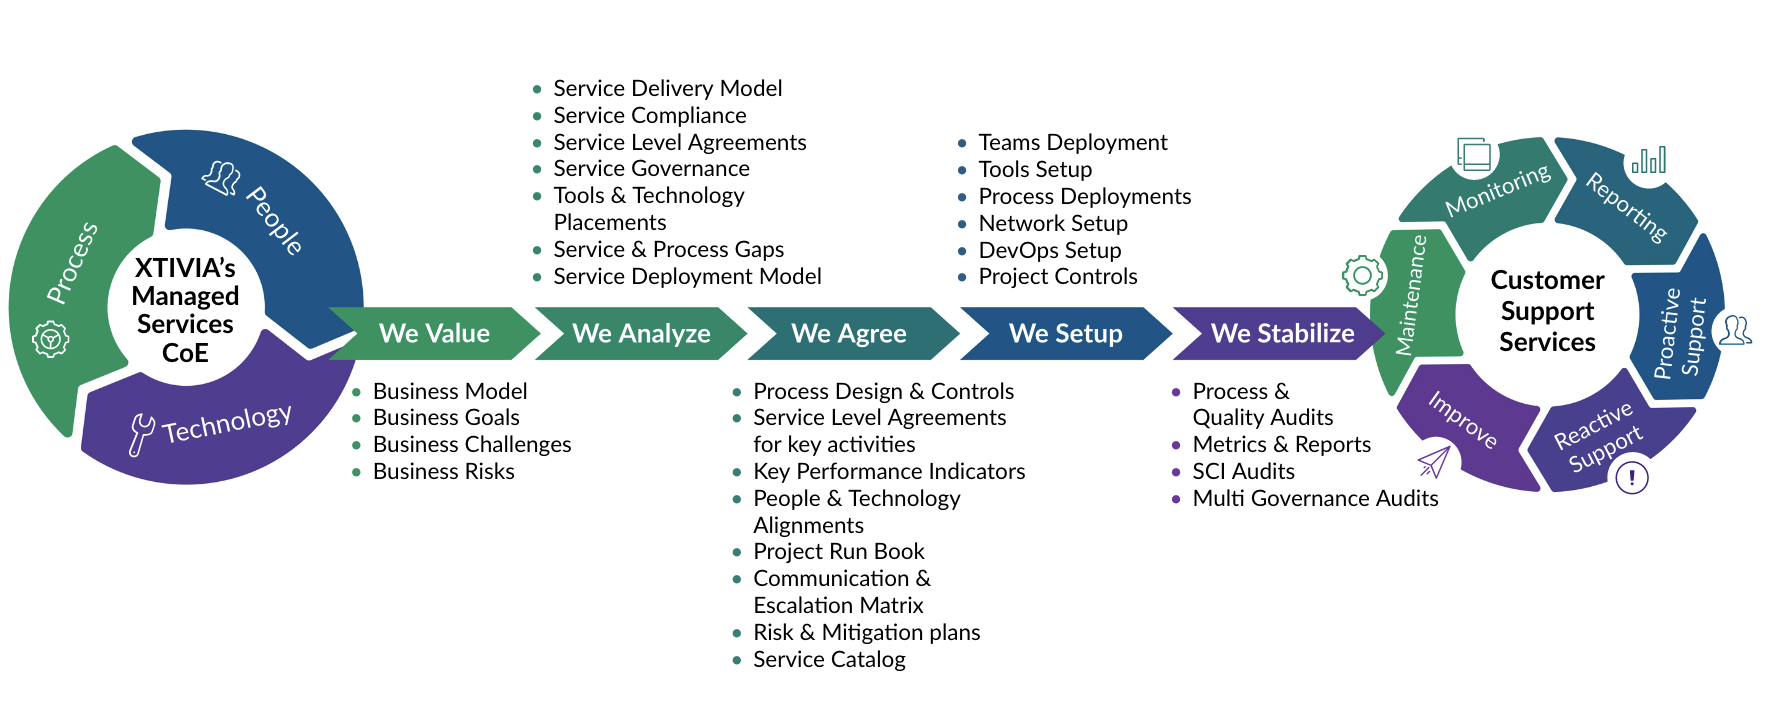 XTIVIA Managed Services Approach